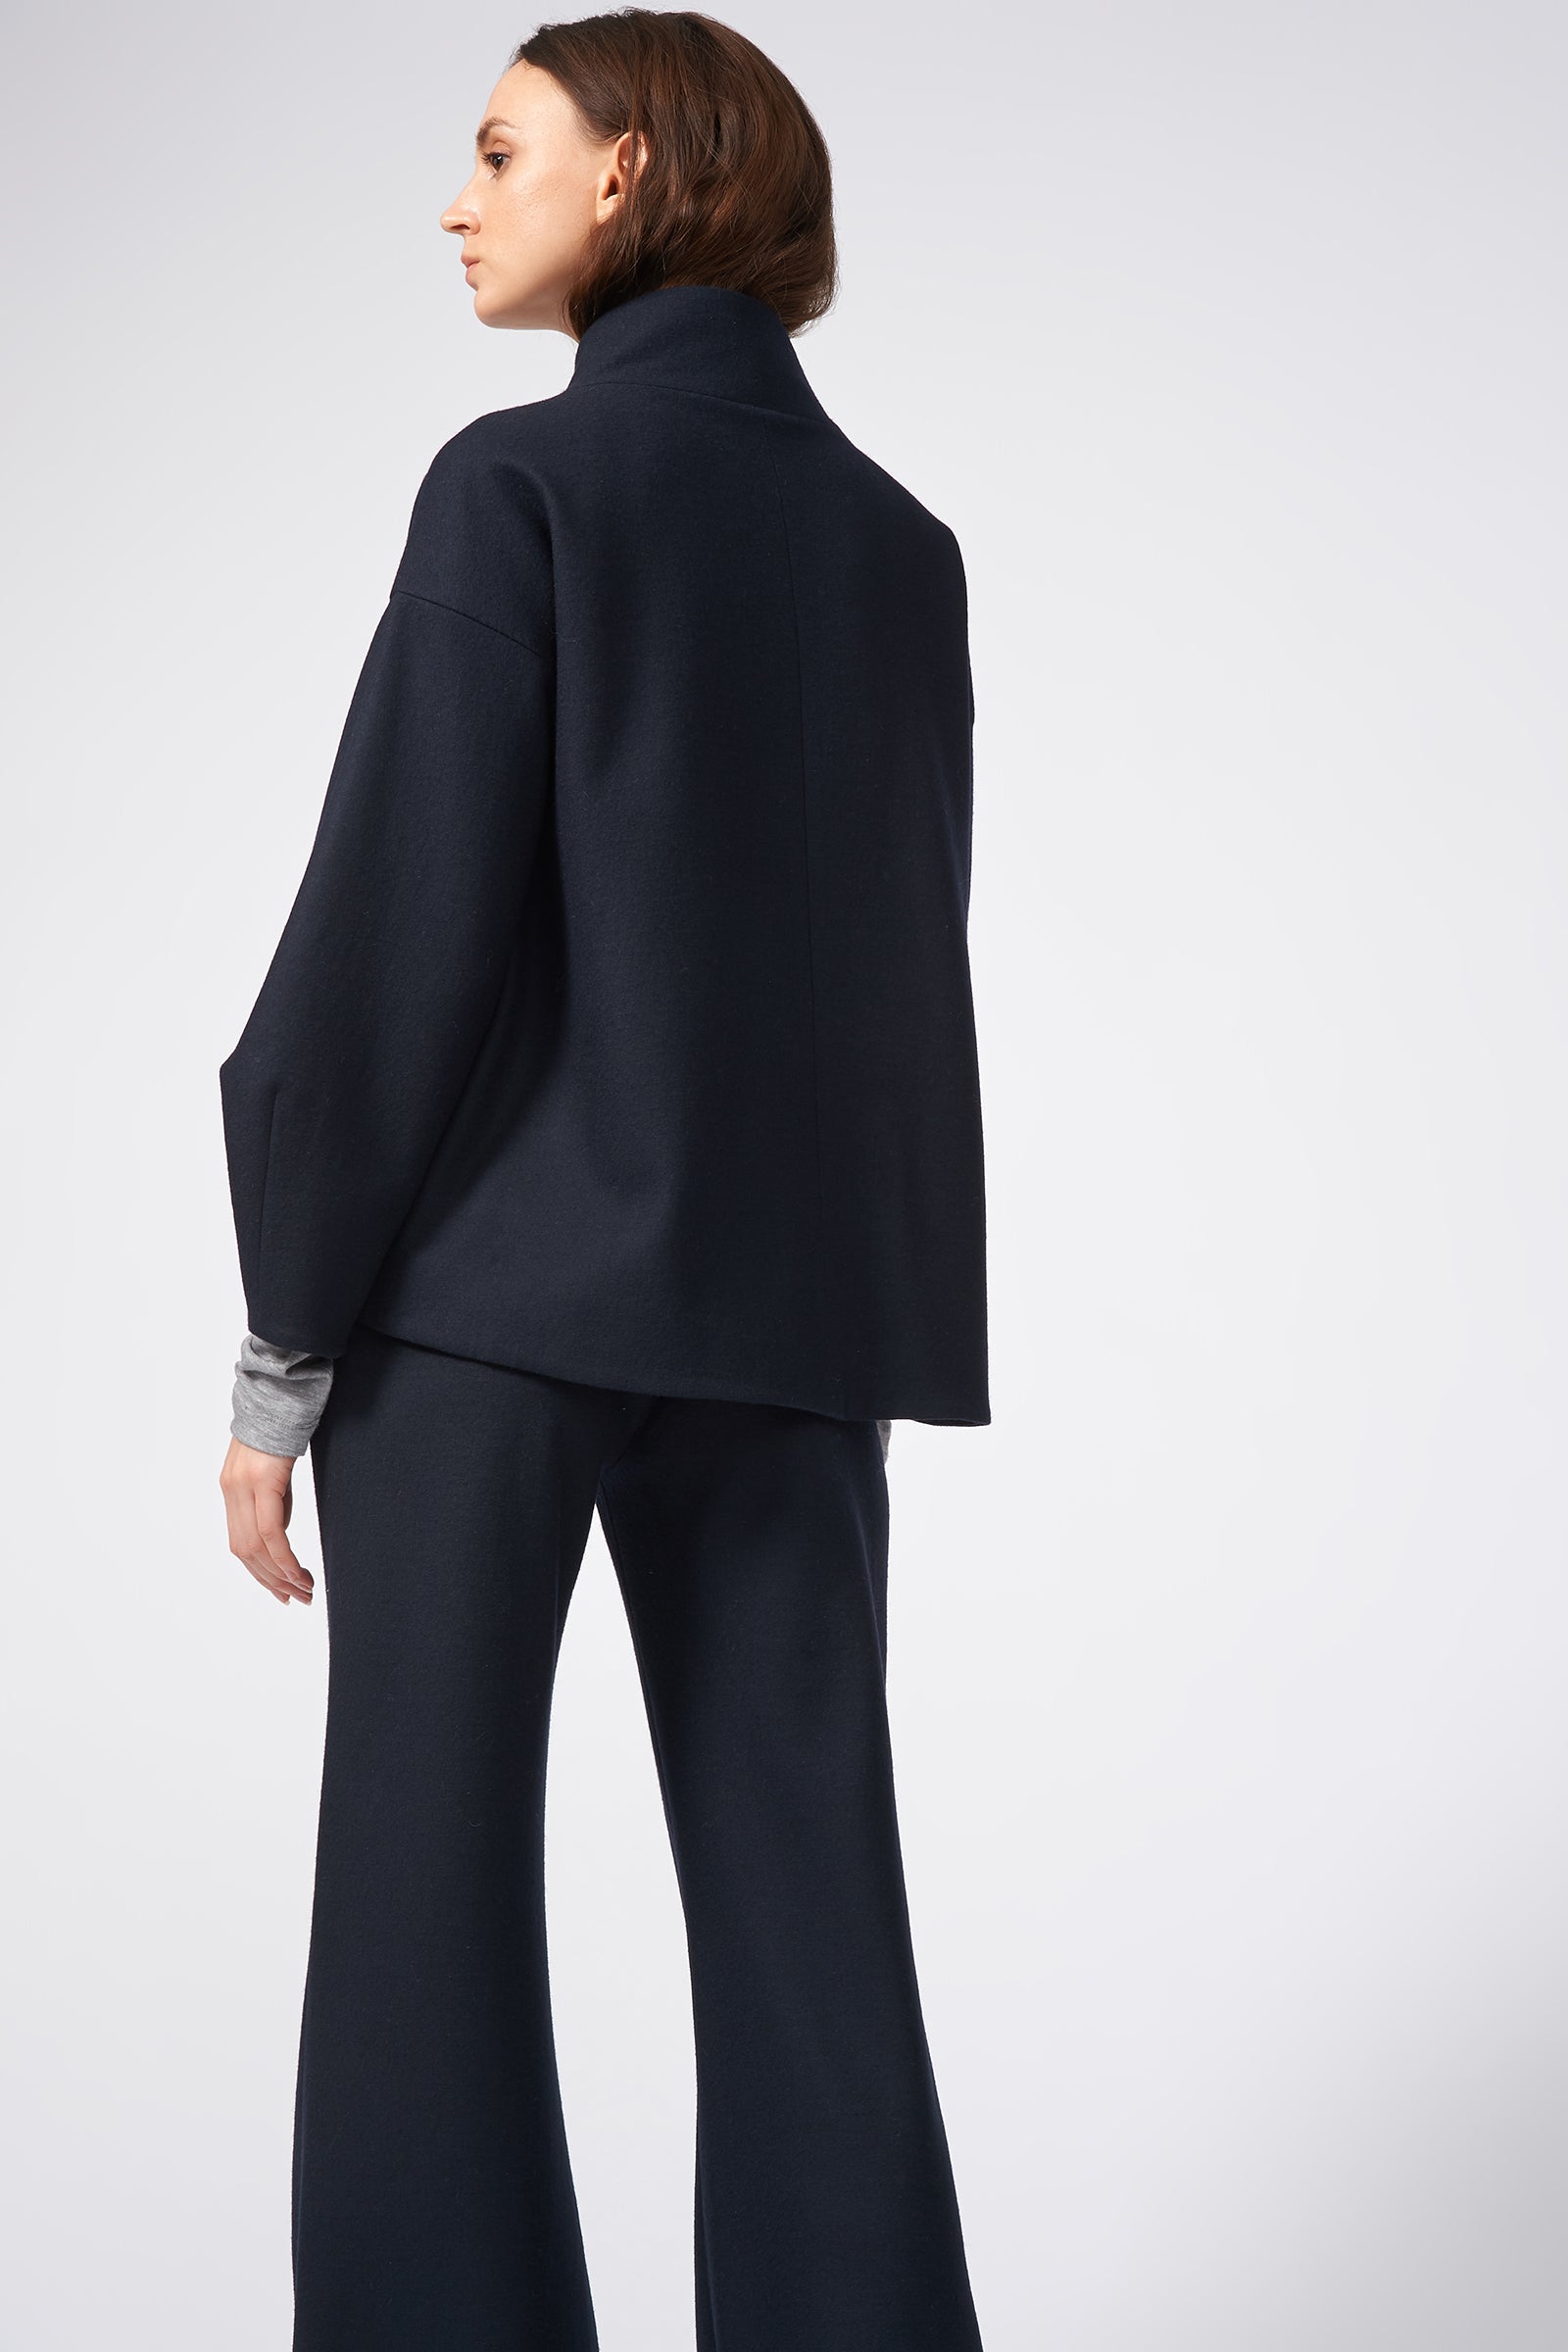 Kal Rieman Angle Cuff Jacket in Midnight on Model Front Side View